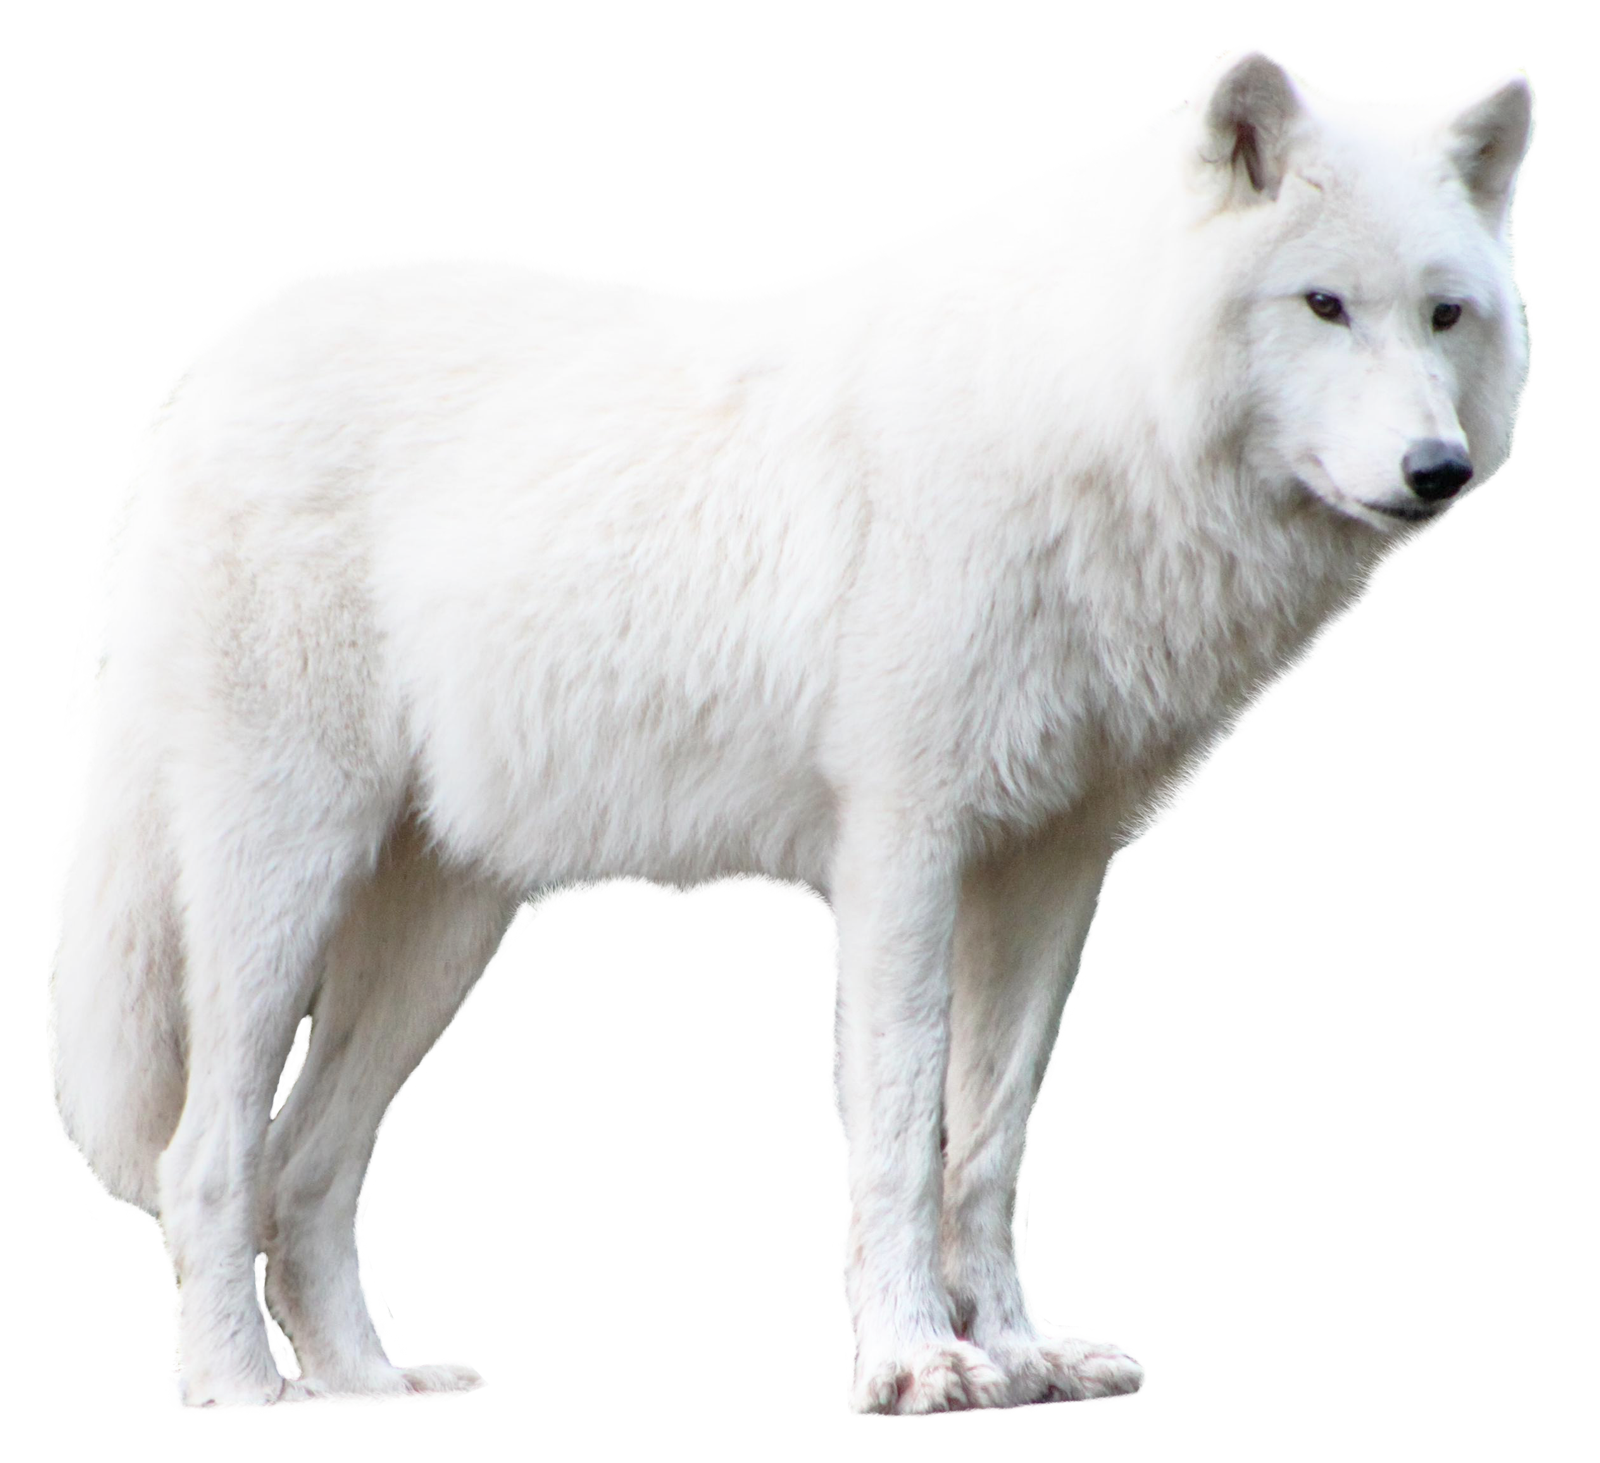 Wolf PNG-PlusPNG.com-1600